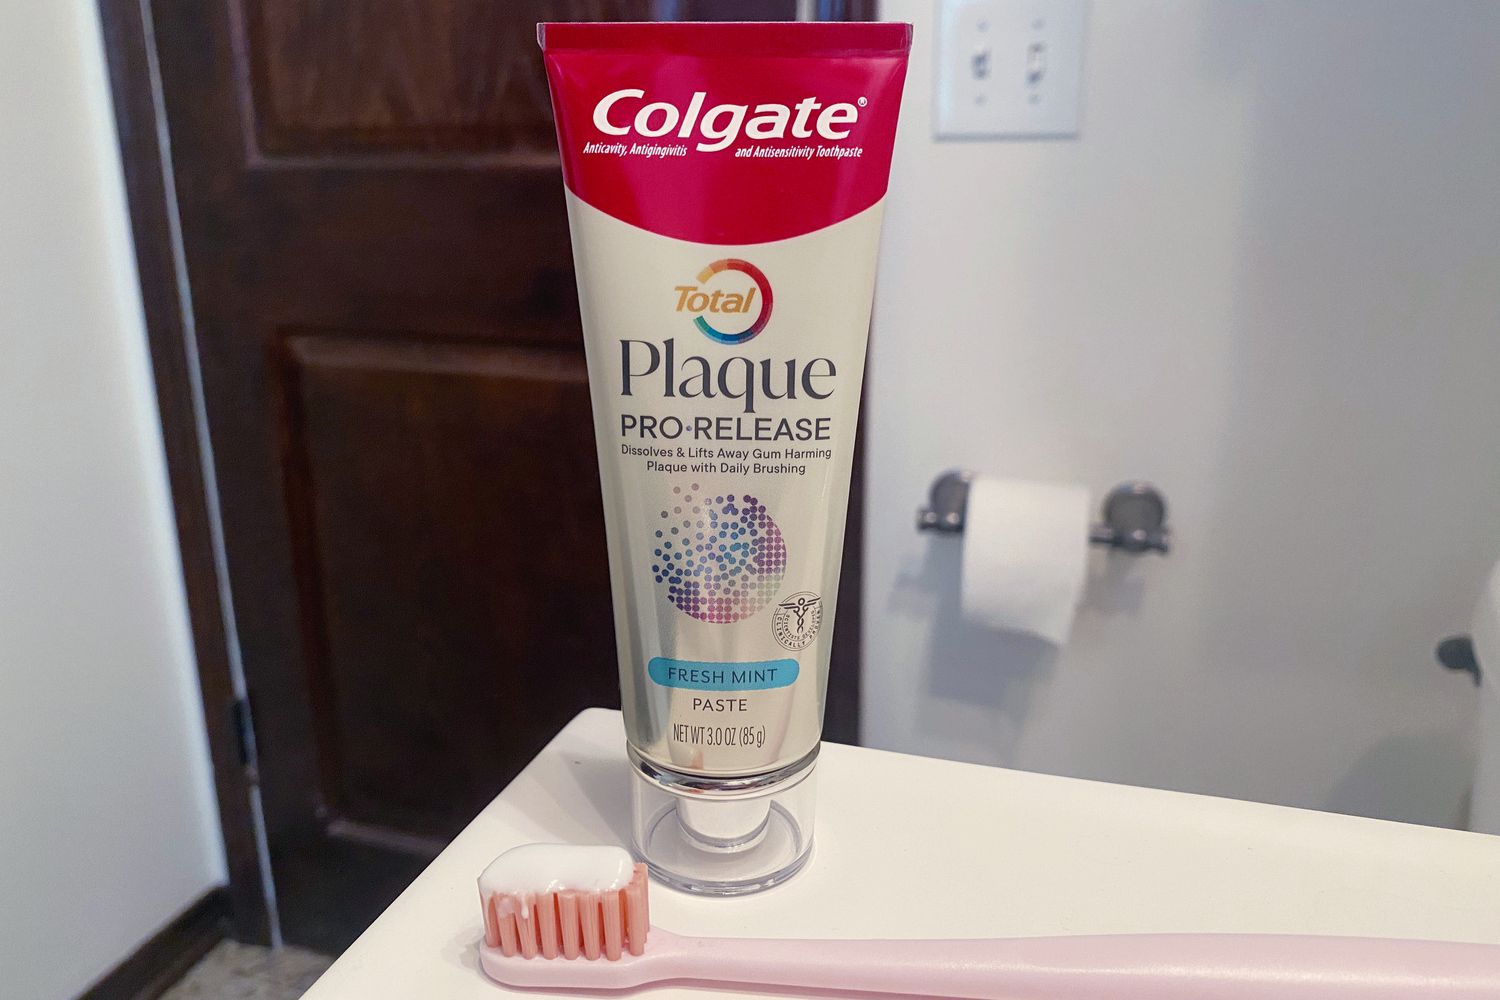 The Colgate Total Plaque Pro-Release Fresh Mint Toothpaste tube in a bathroom